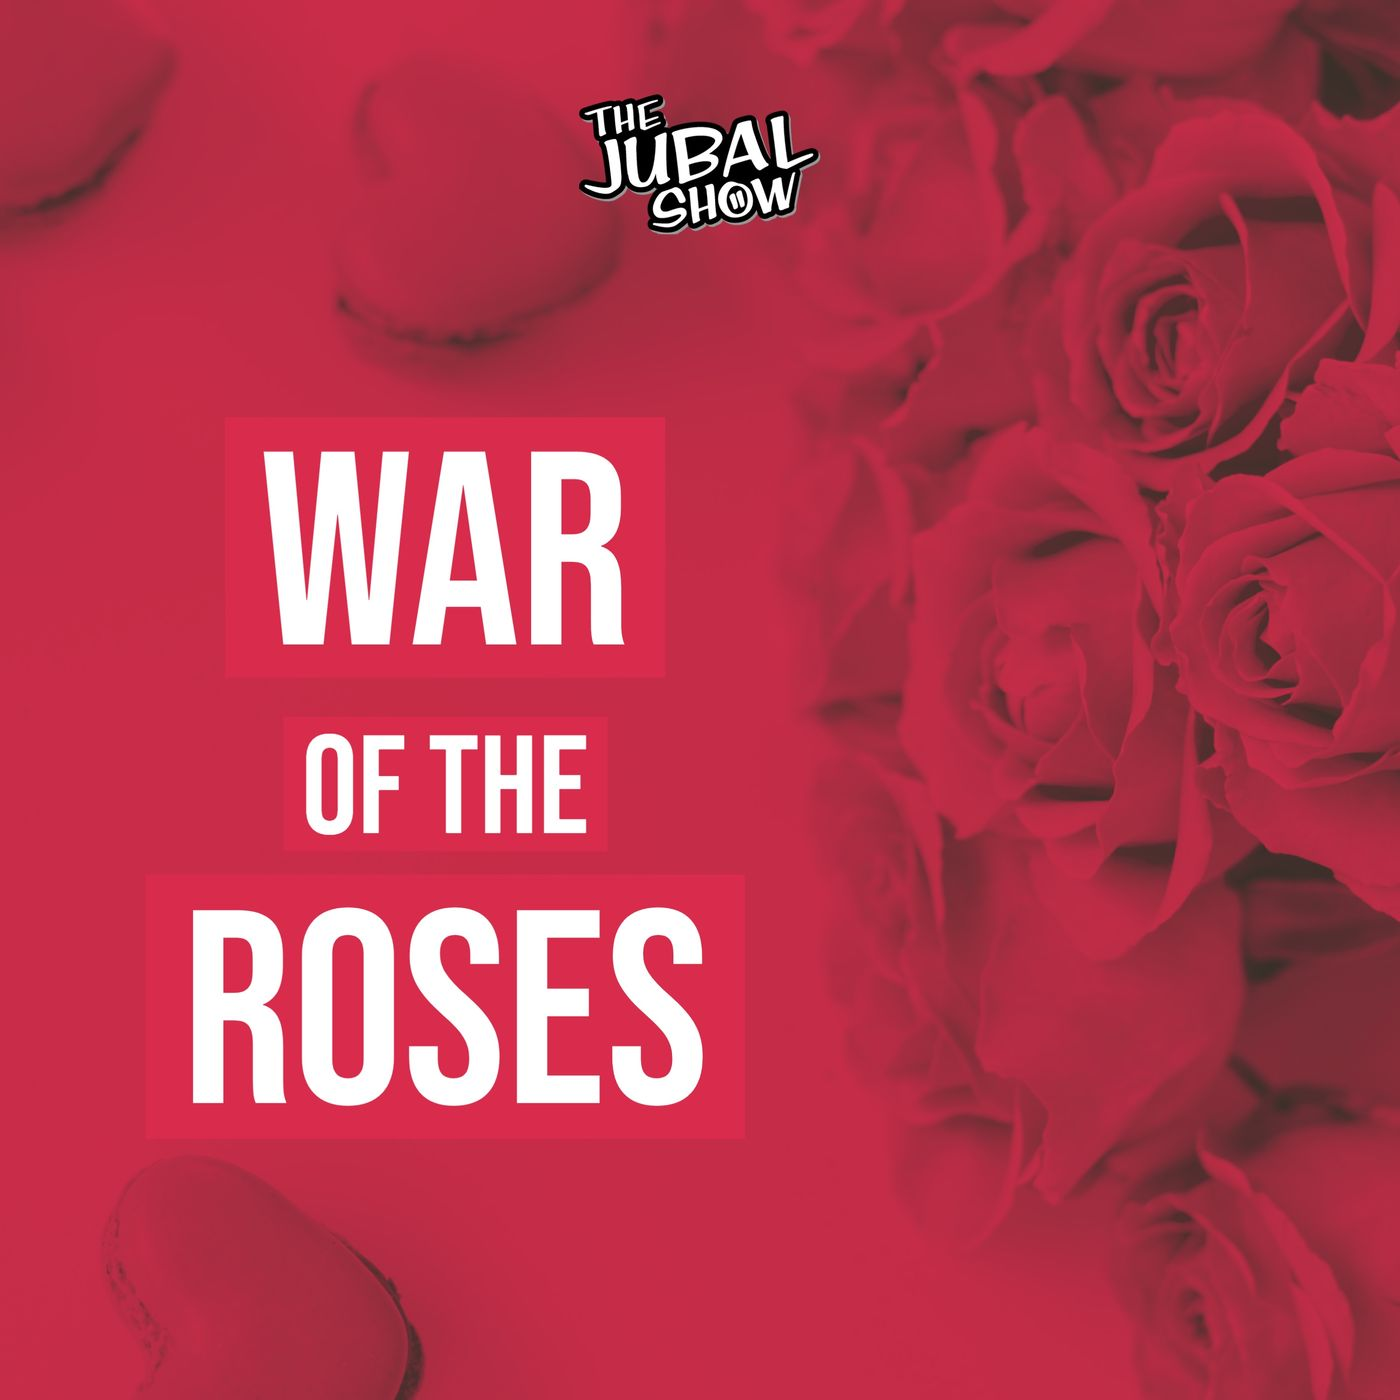 The Jubal Show's collecting reward point in this War of the Roses!